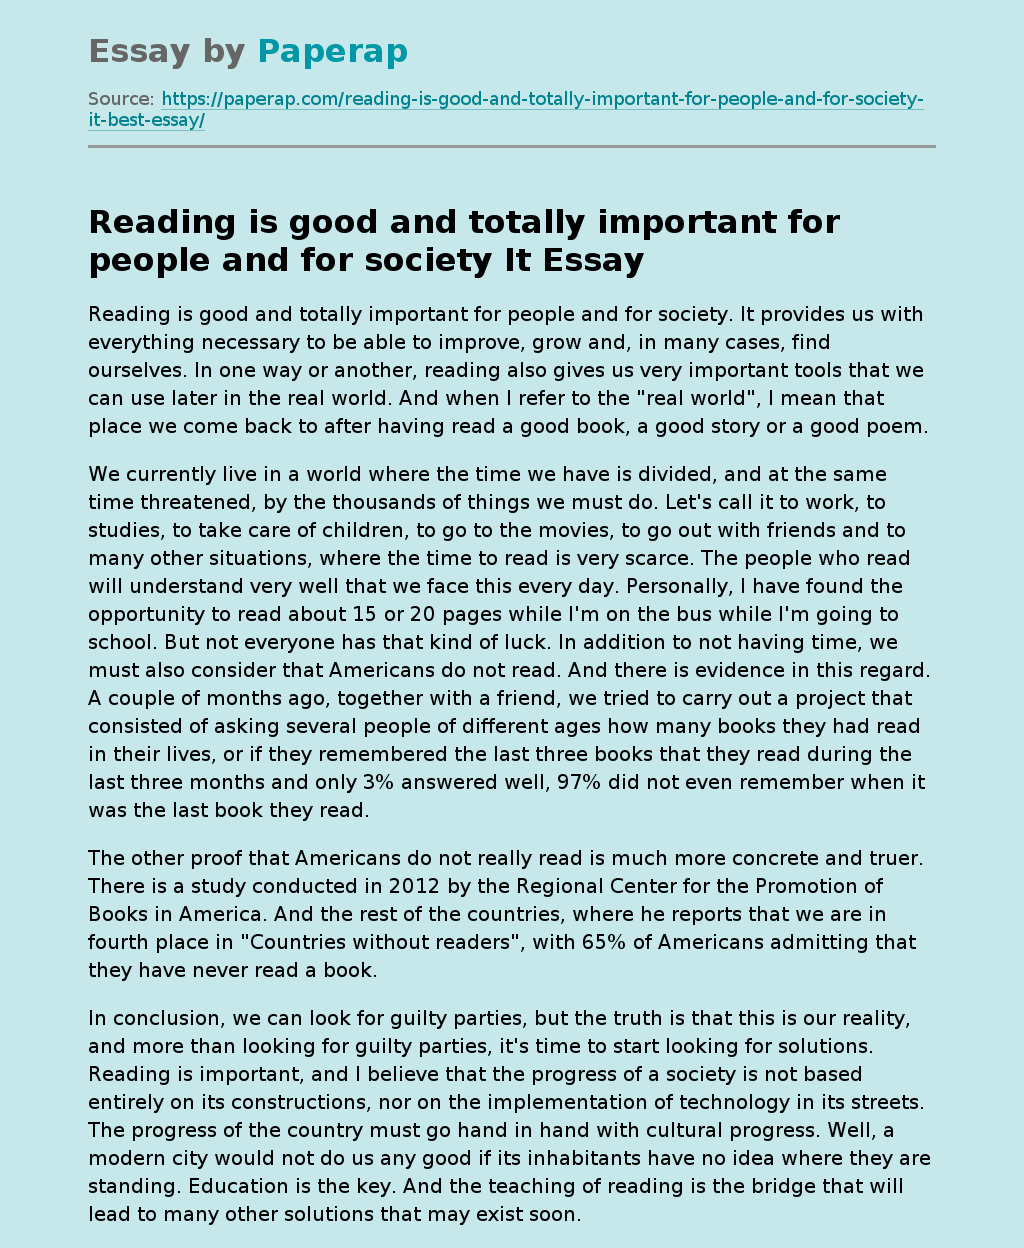 The Importance of Reading